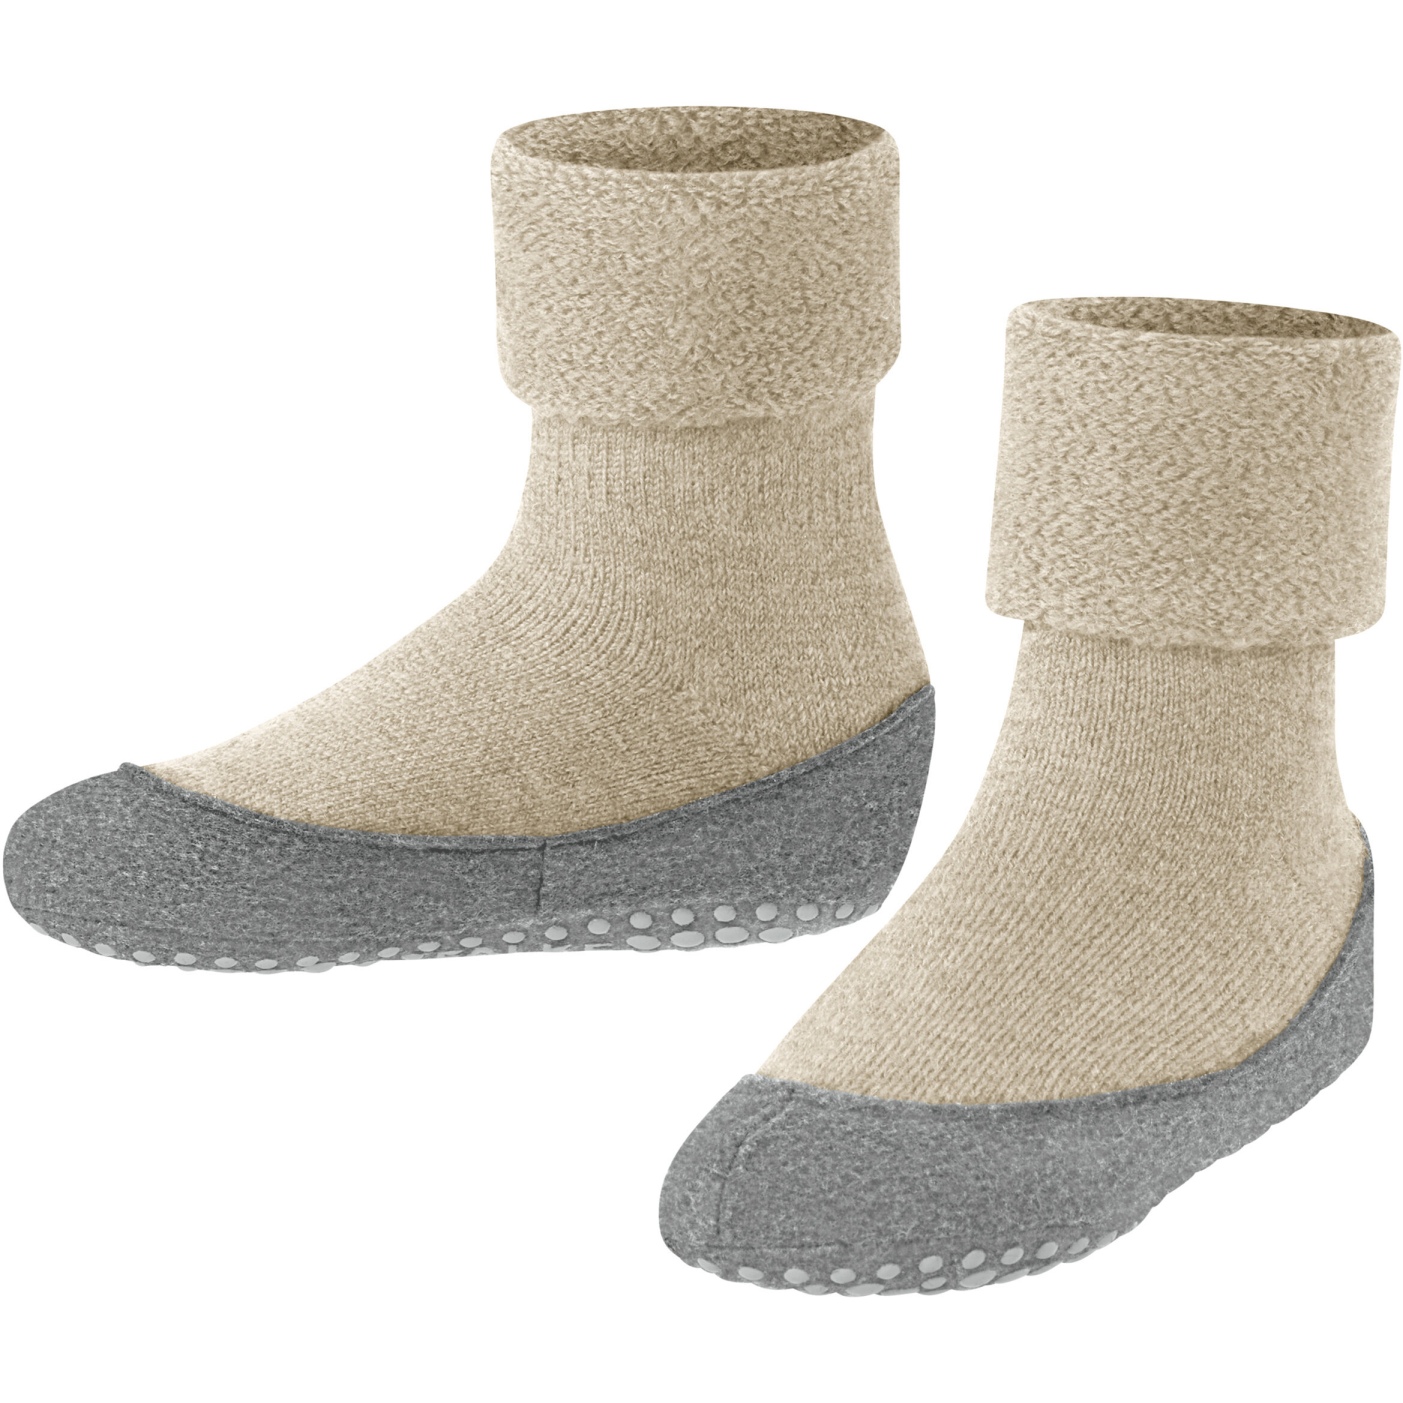 Picture of Falke Cosyshoe SO CP Slippers Kids - sand melange 4651